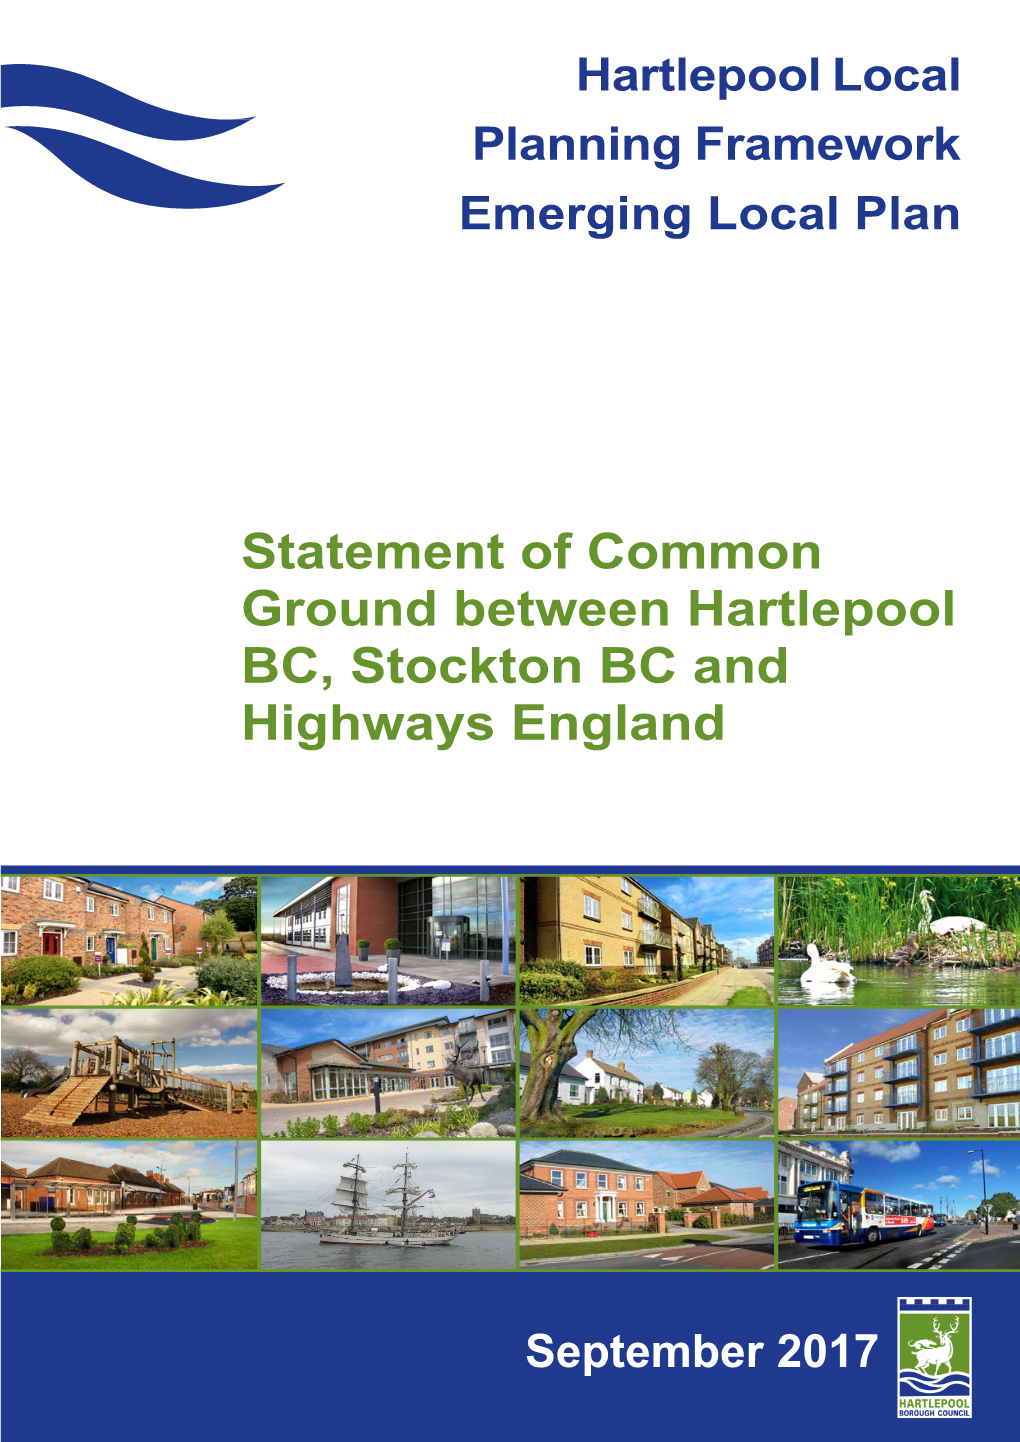 Statement of Common Ground Between Hartlepool BC, Stockton BC and Highways England